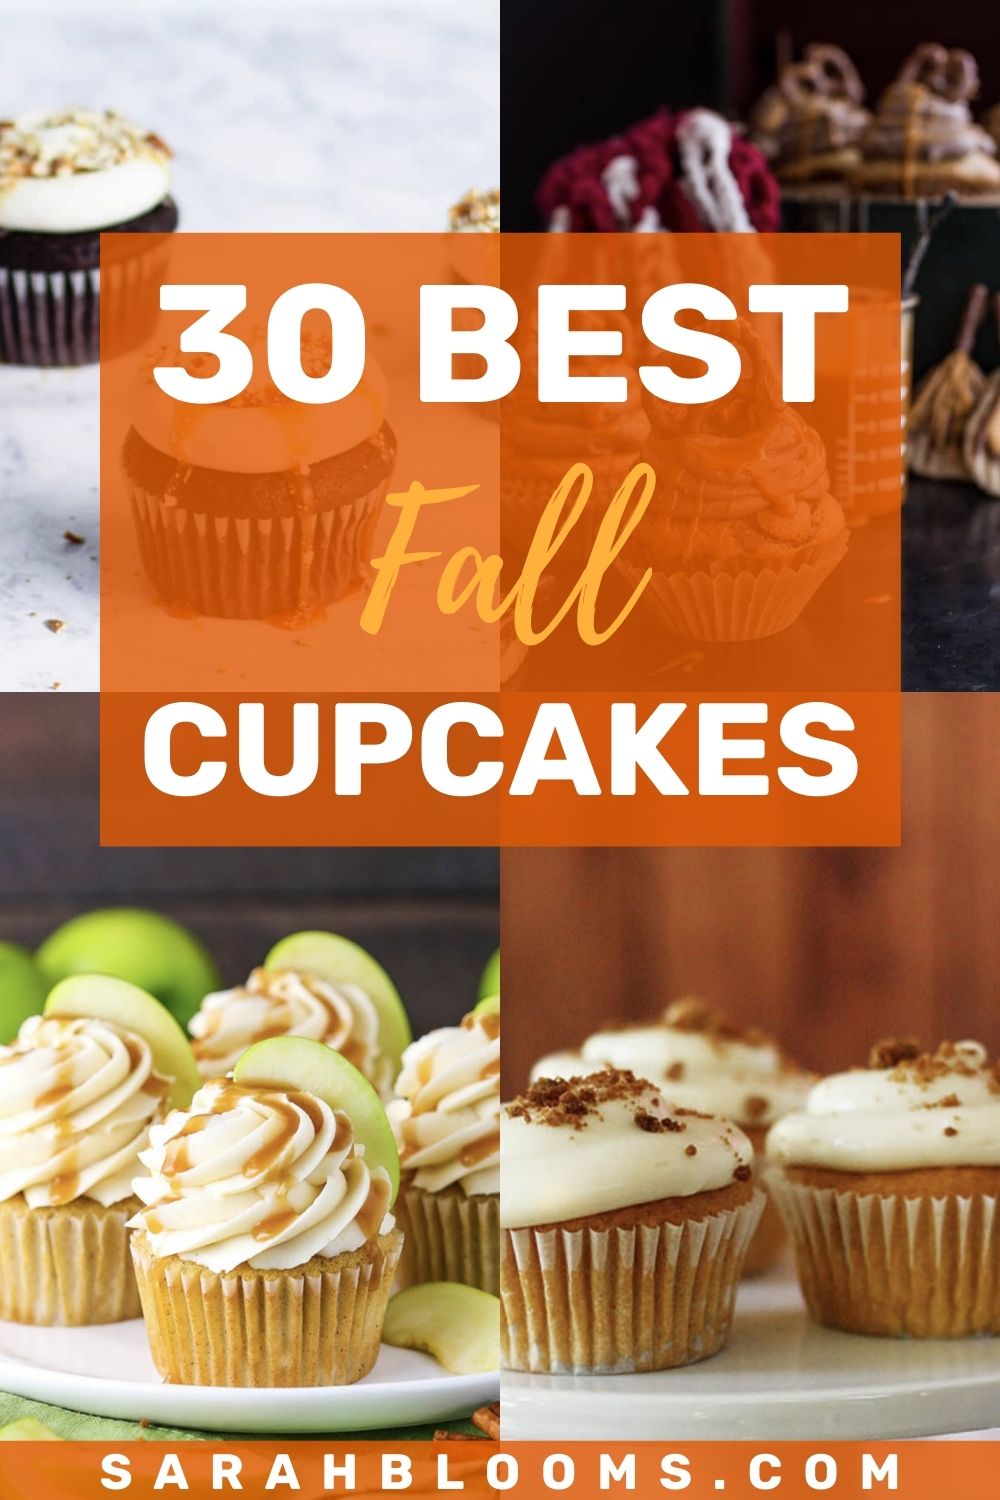 Enjoy all your favorite fall flavors with these Easy + Delicious Fall Cupcakes for every taste! Vanilla, chocolate, caramel, pretzel, pumpkin, apple, and more! Make these Easy Fall Cupcakes for any occasion - even Thanksgiving dinner! #fallcupcakes #falldesserts #fallrecipes #fallentertaining #thanksgivingdesserts #thanksgivingrecipes #thanksgivingdinner